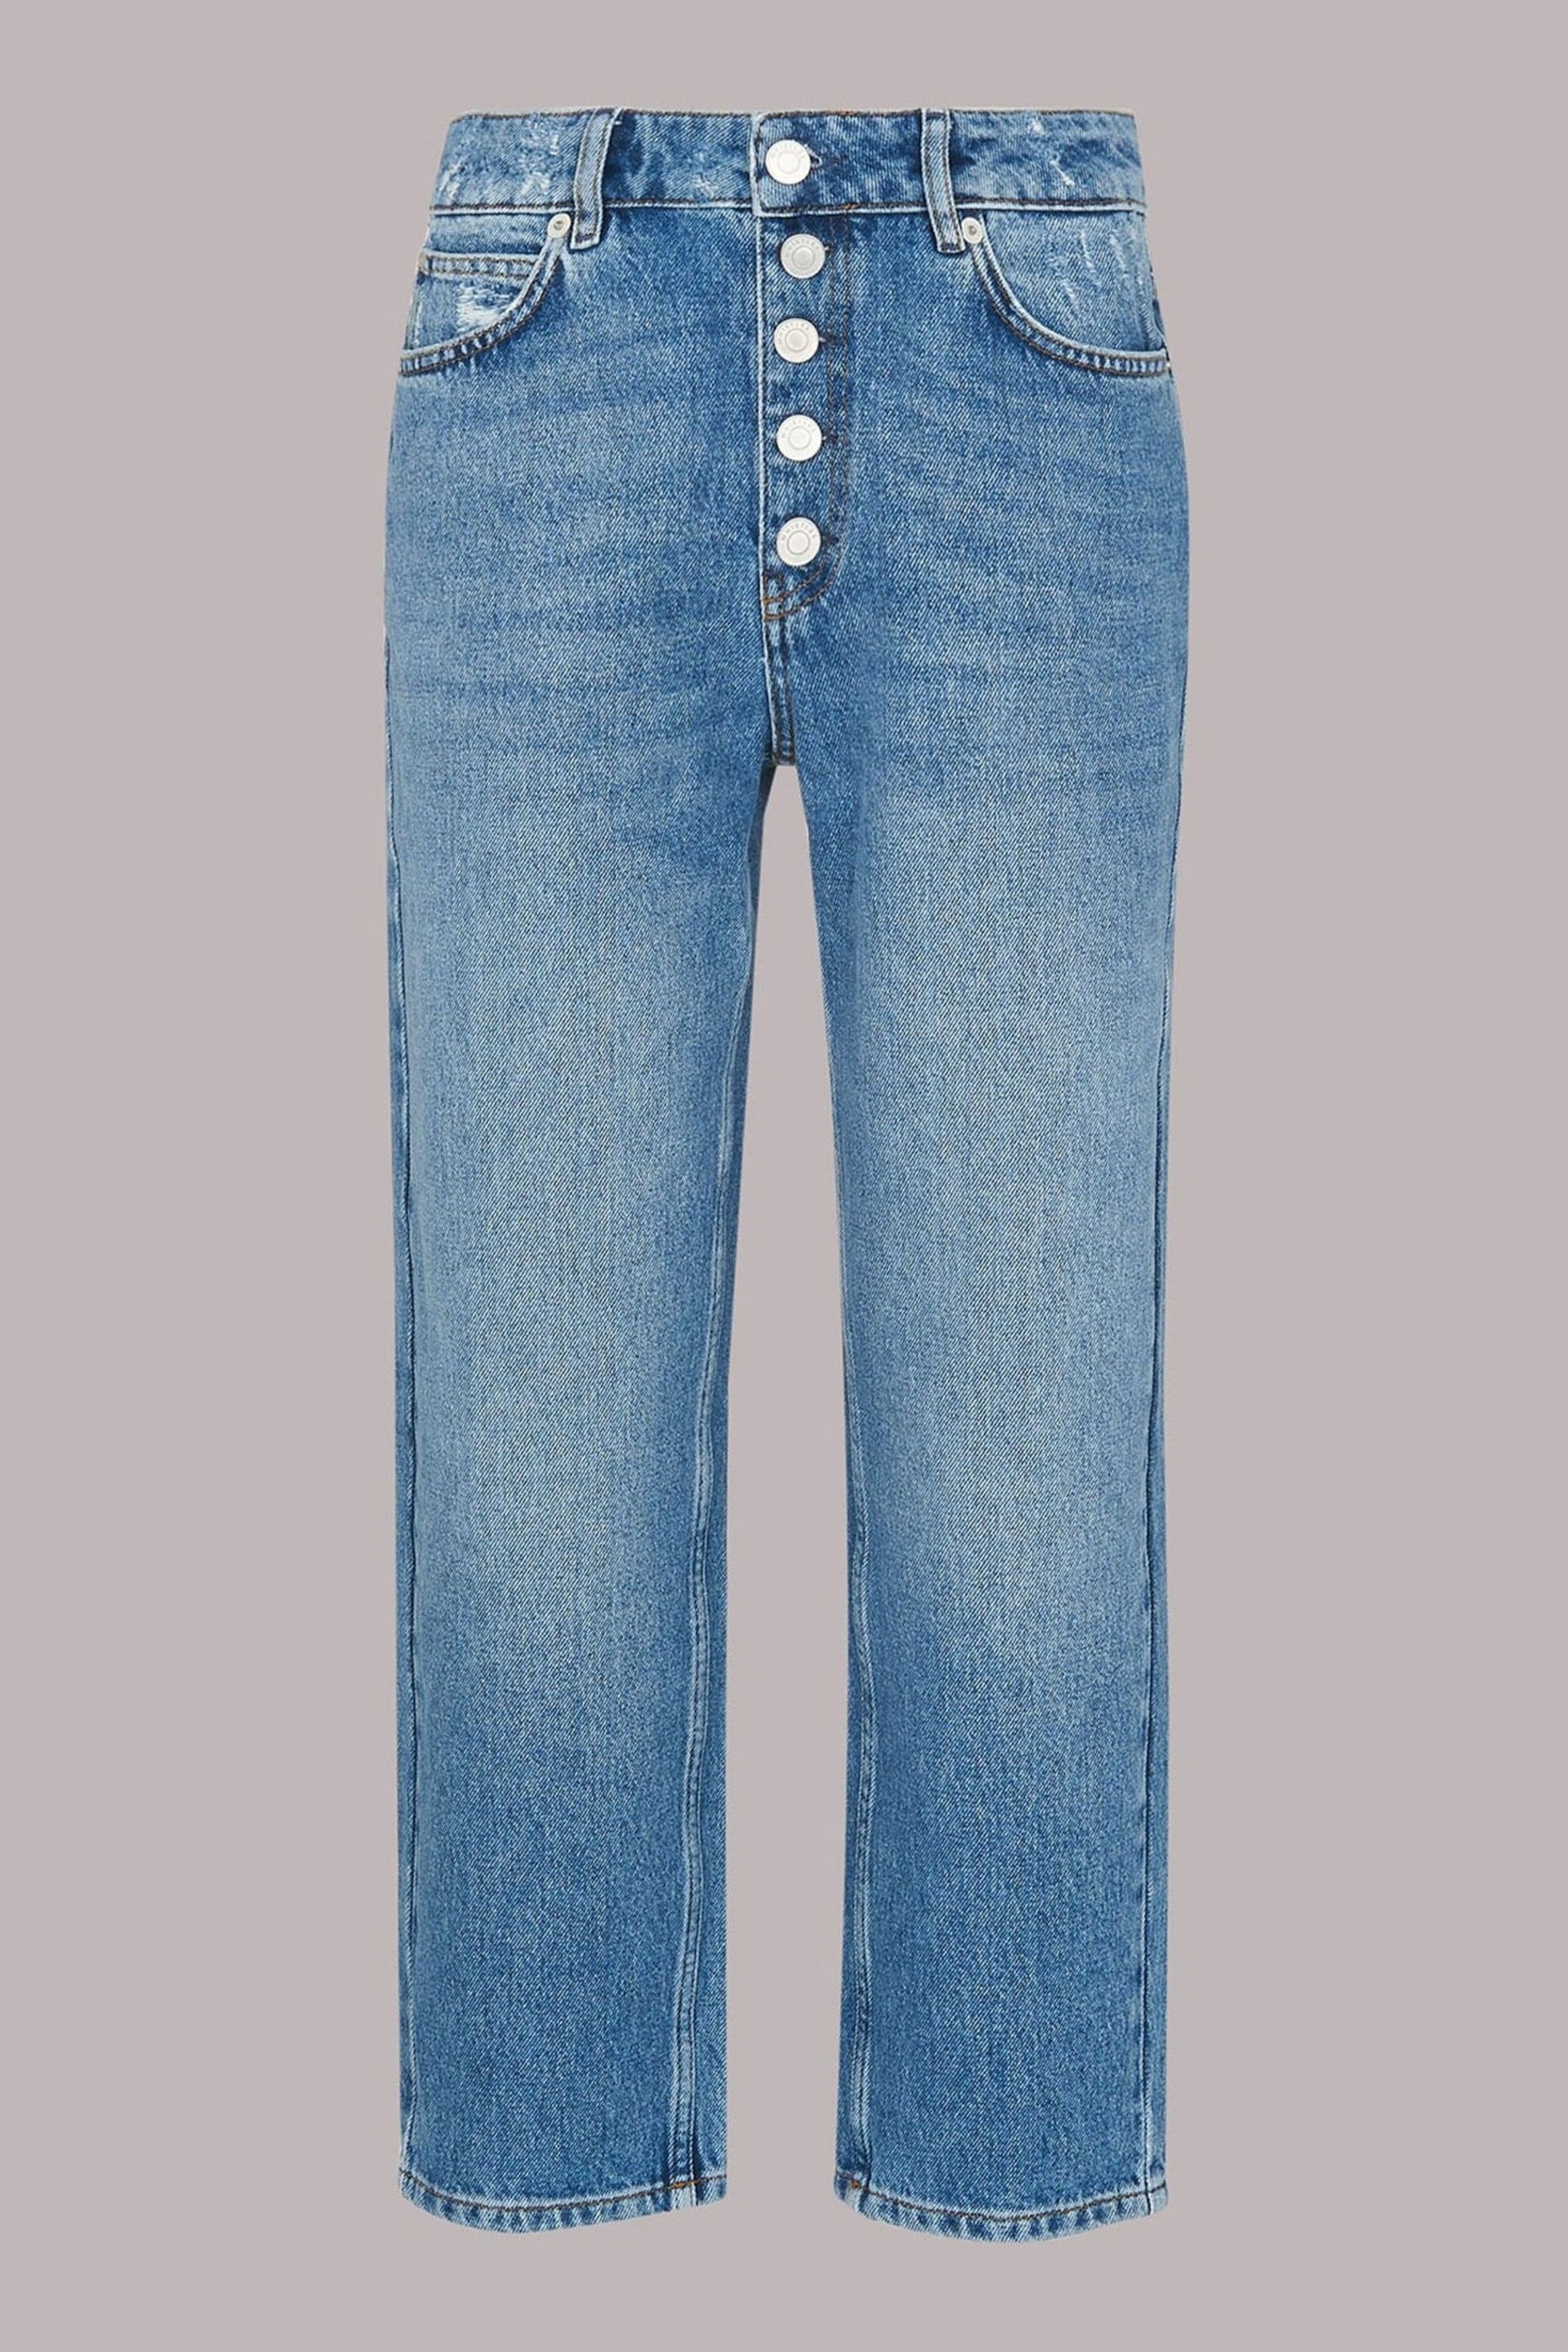 Whistles Authentic Hollie Button Crop Jeans - Image 5 of 5